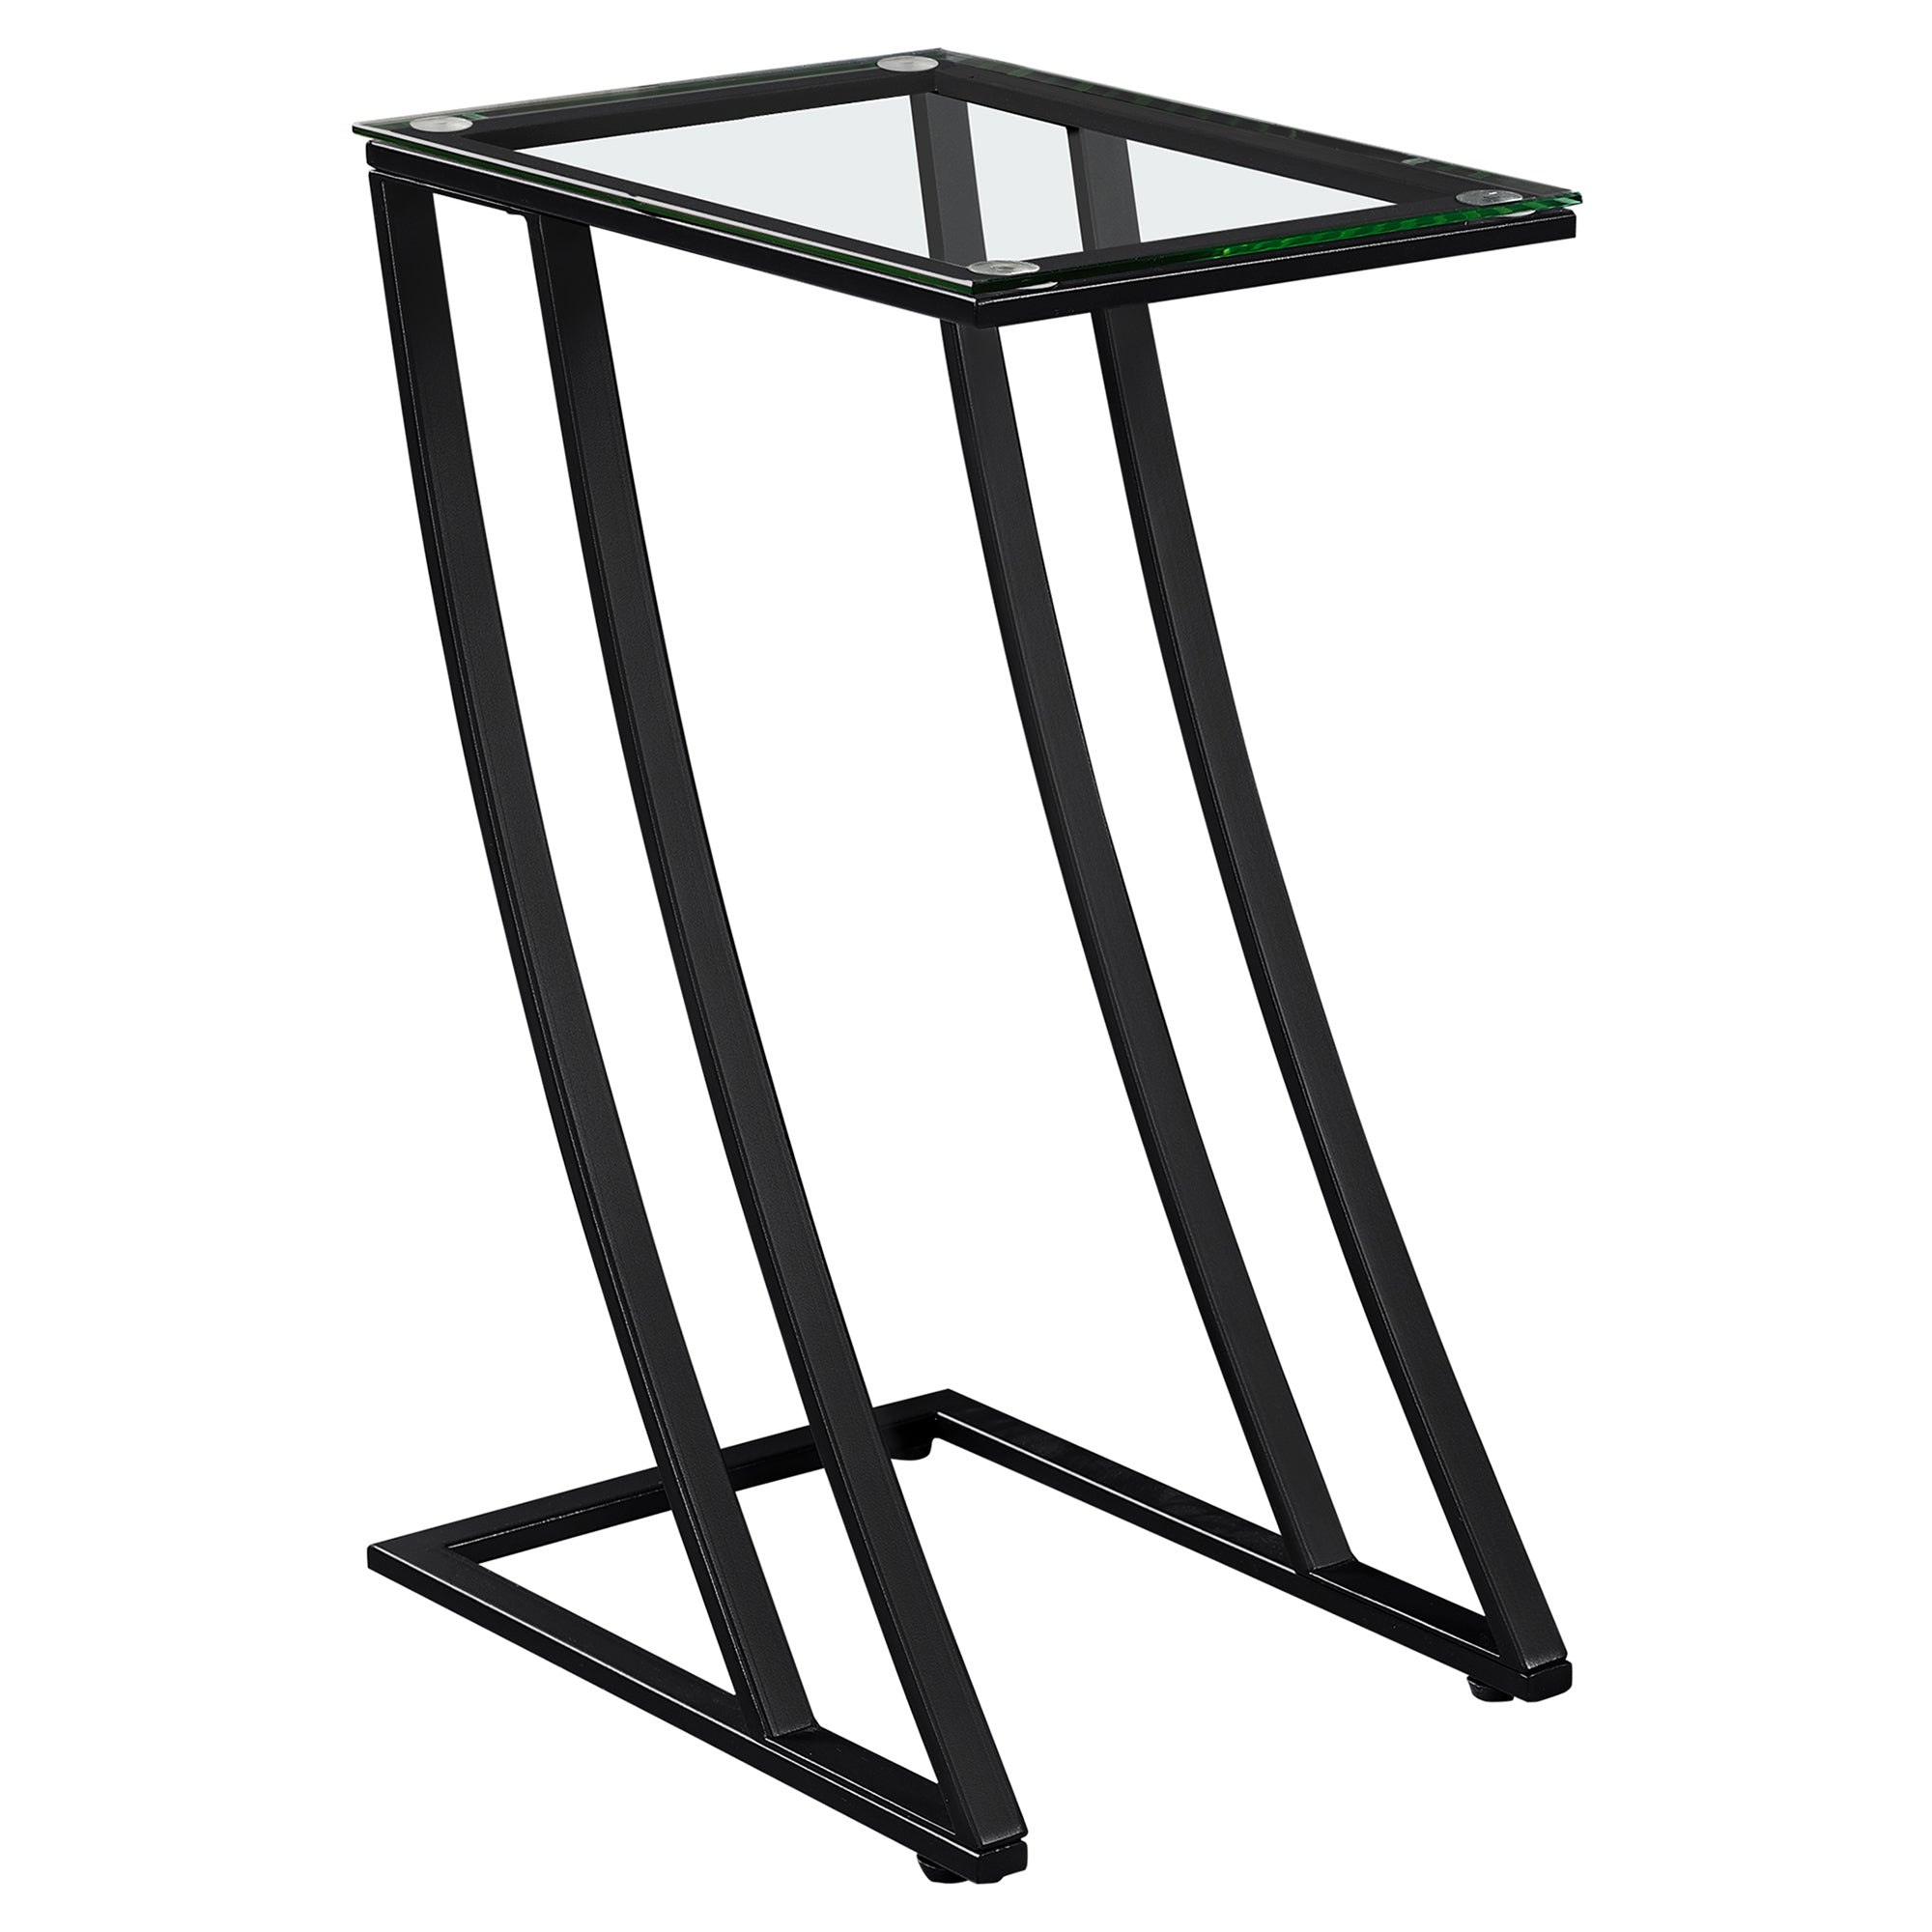 MN-193089    Accent Table, C-Shaped, End, Side, Snack, Living Room, Bedroom, Metal Base, Tempered Glass, Black, Black Tinted, Contemporary, Modern